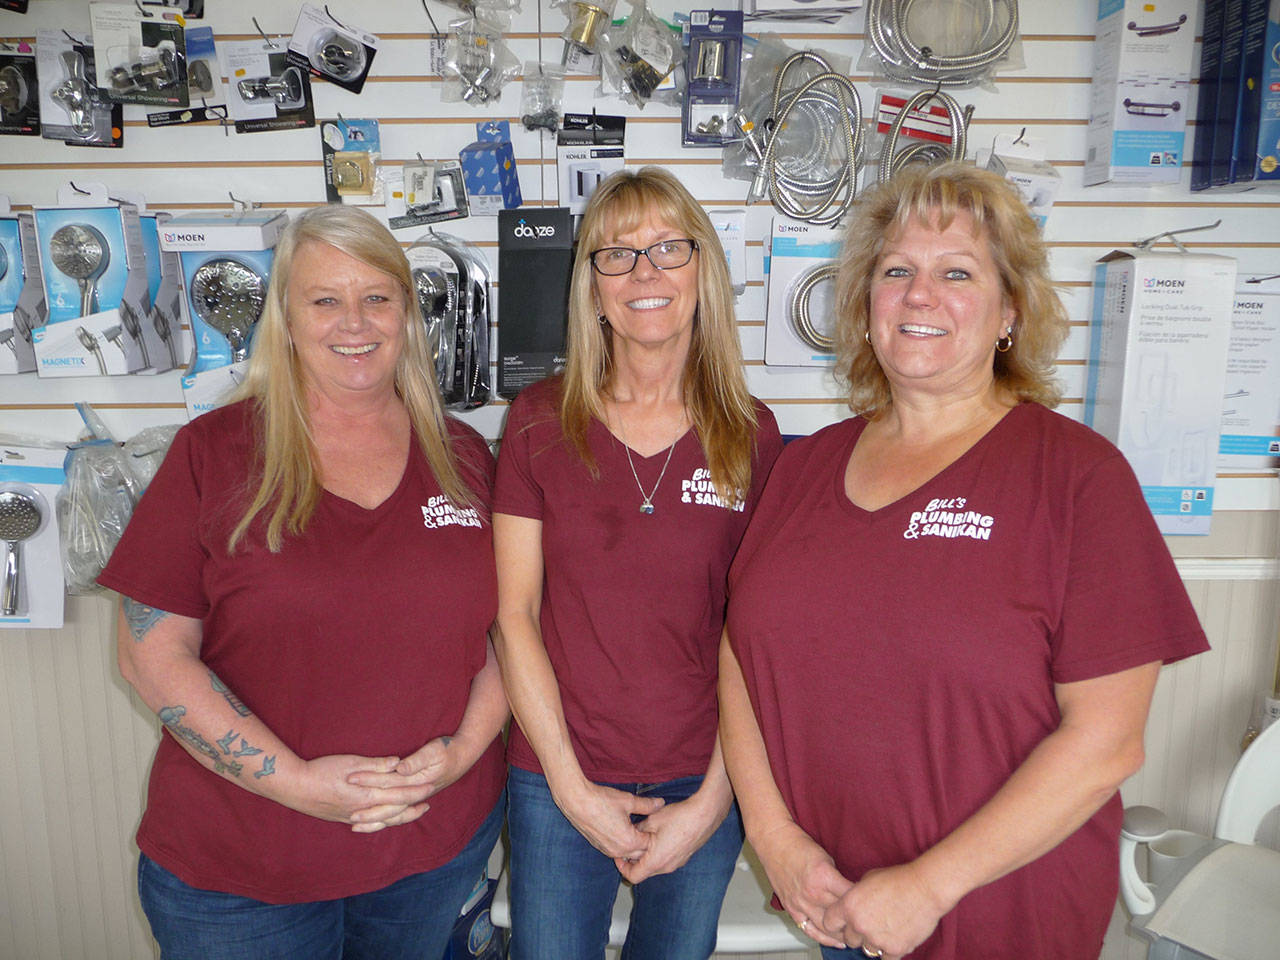 There is a wealth of knowledge in the employees at Bill’s Plumbing Sanikan. From left are Nancy Coon, co-owner Judy Kilmer and manager Karen Lewis. Sequim Gazette photos by Patricia Morrison Coate